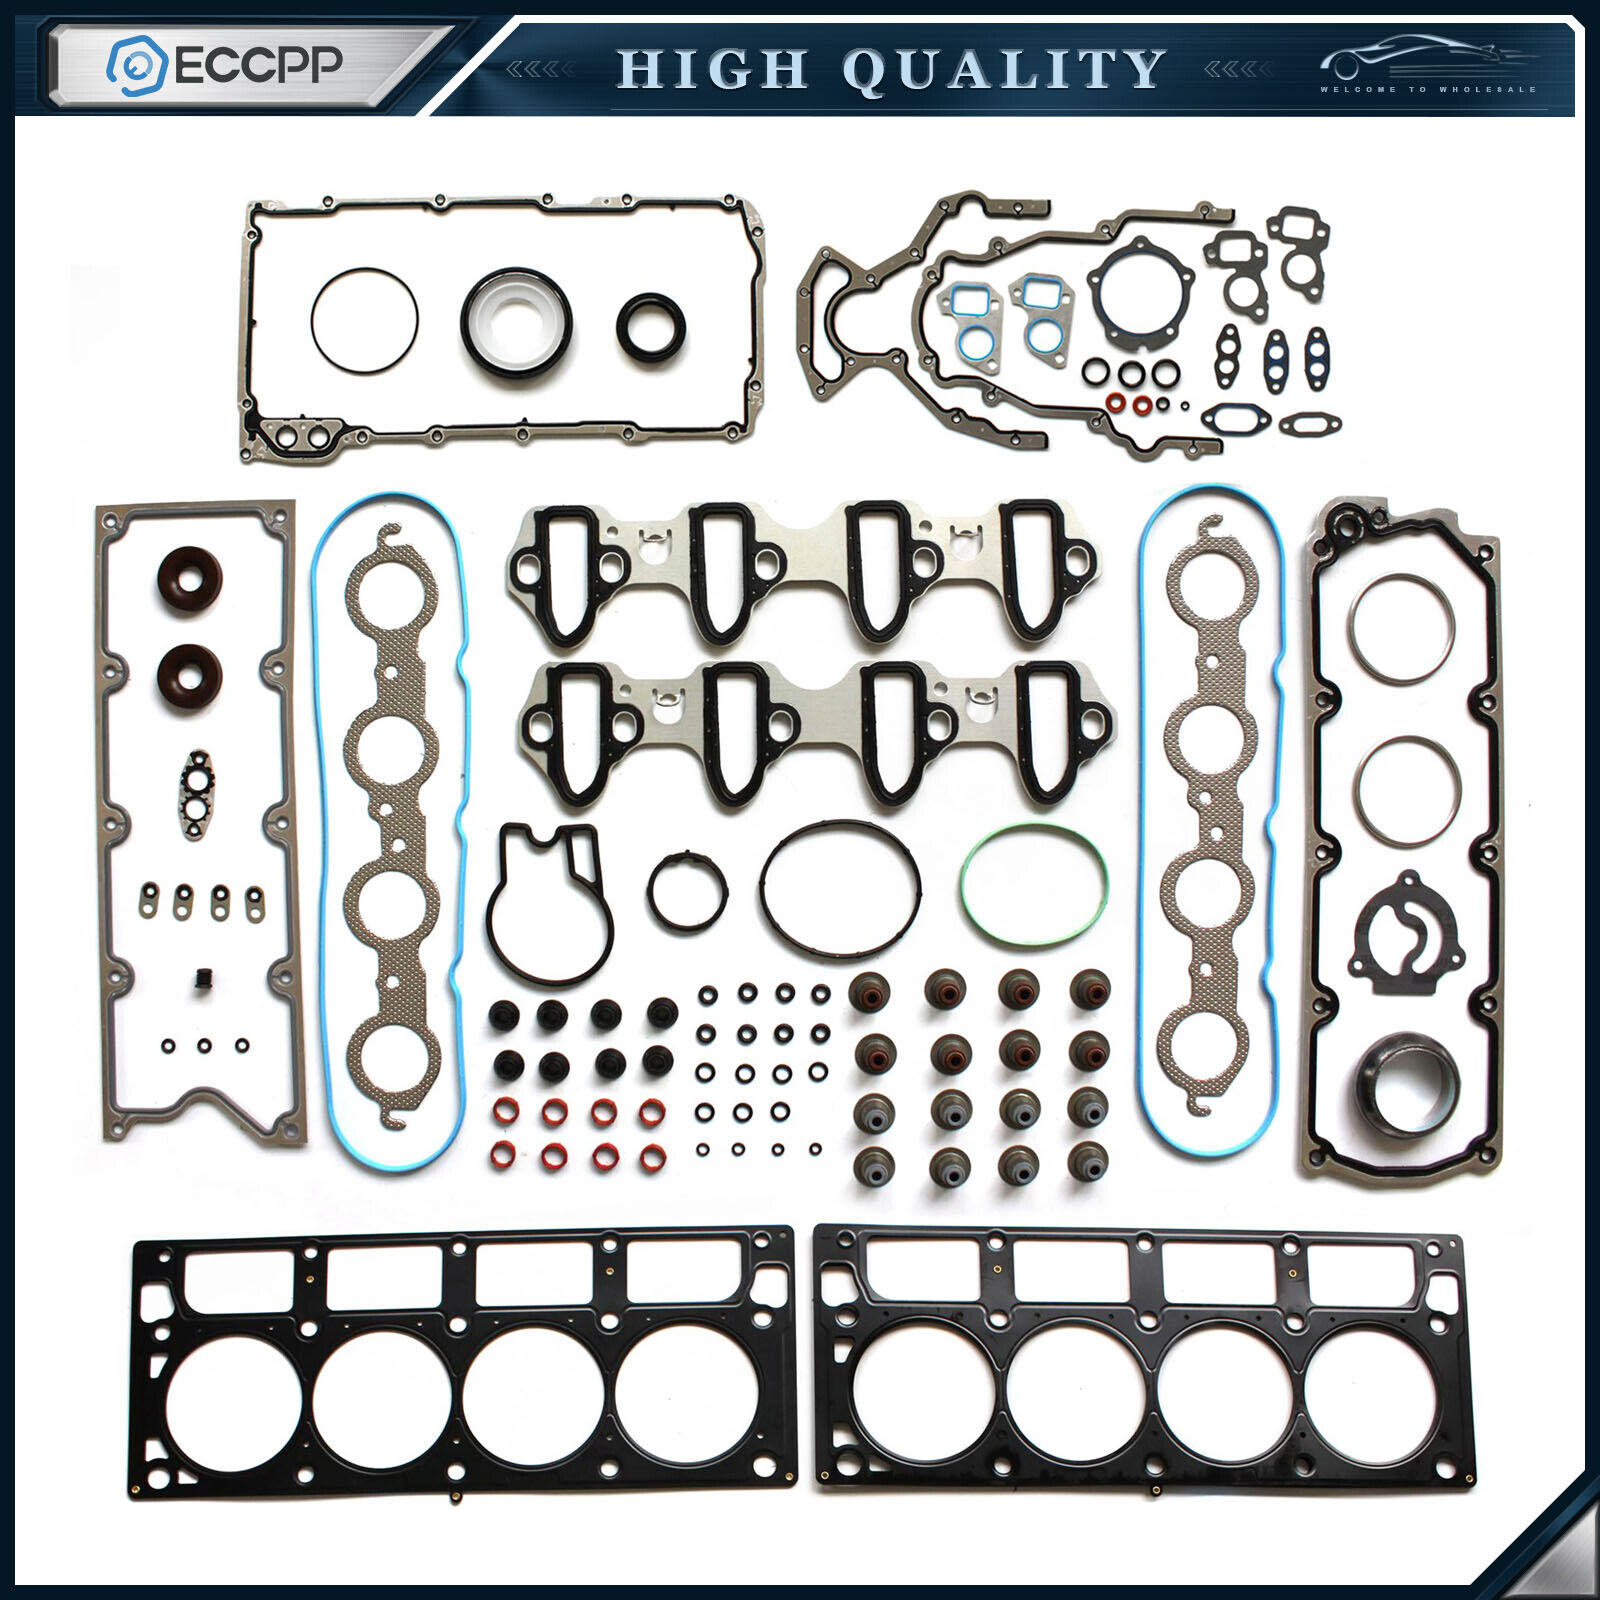 Full Gasket Set Fit for 2004-2006 GMC Sierra 1500 Cadillac Escalade EXT 6.0L